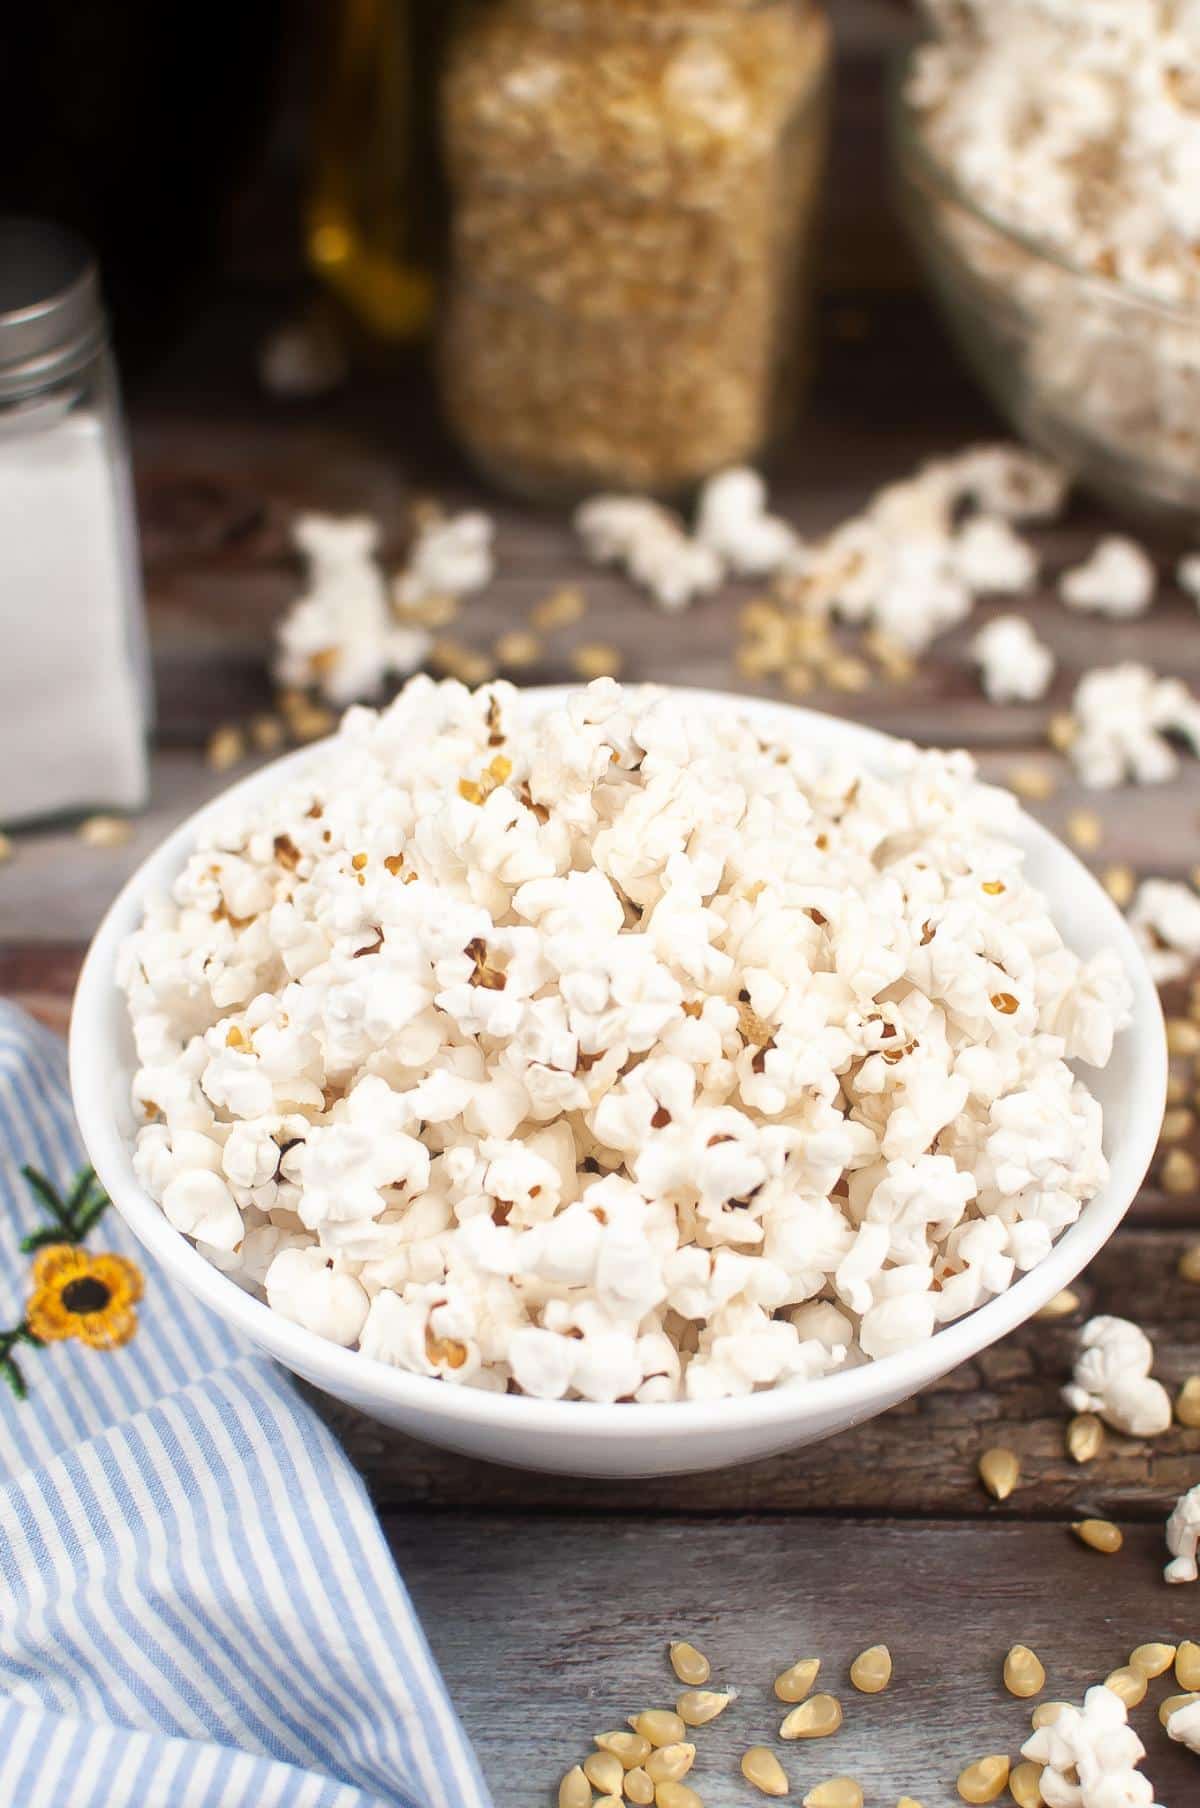 Bowl of air fryer popcorn on a wooden surface with kernels and a blue striped cloth nearby.